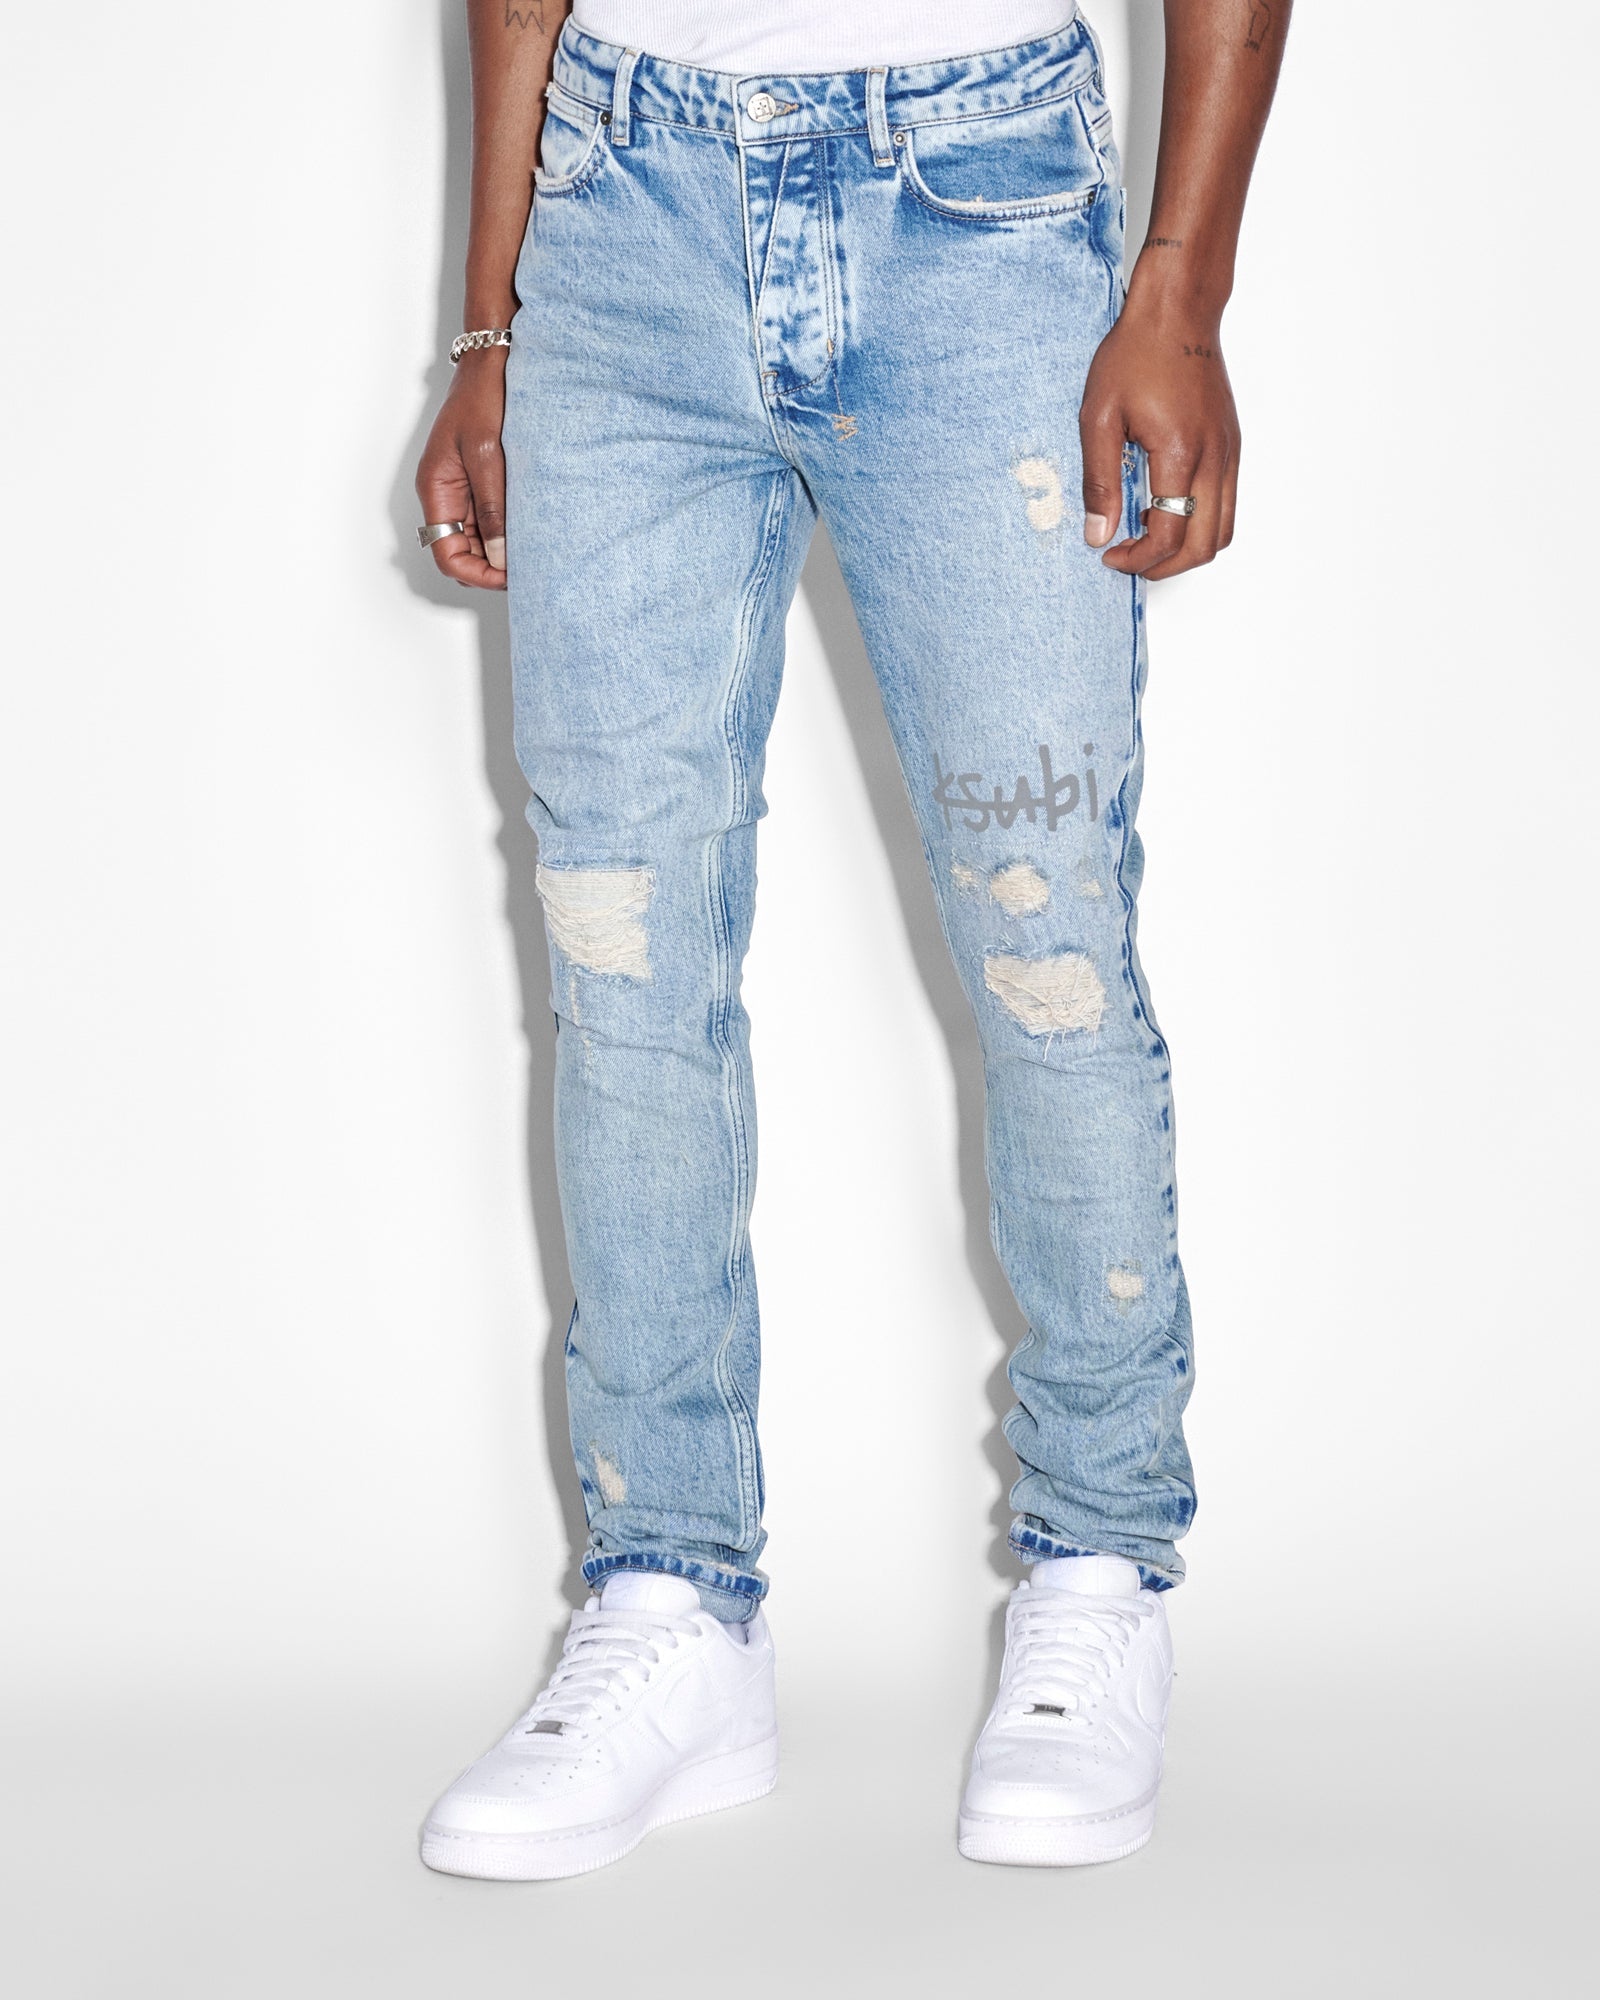  Black Ripped Jeans for Men,Washed Distressed Jeans